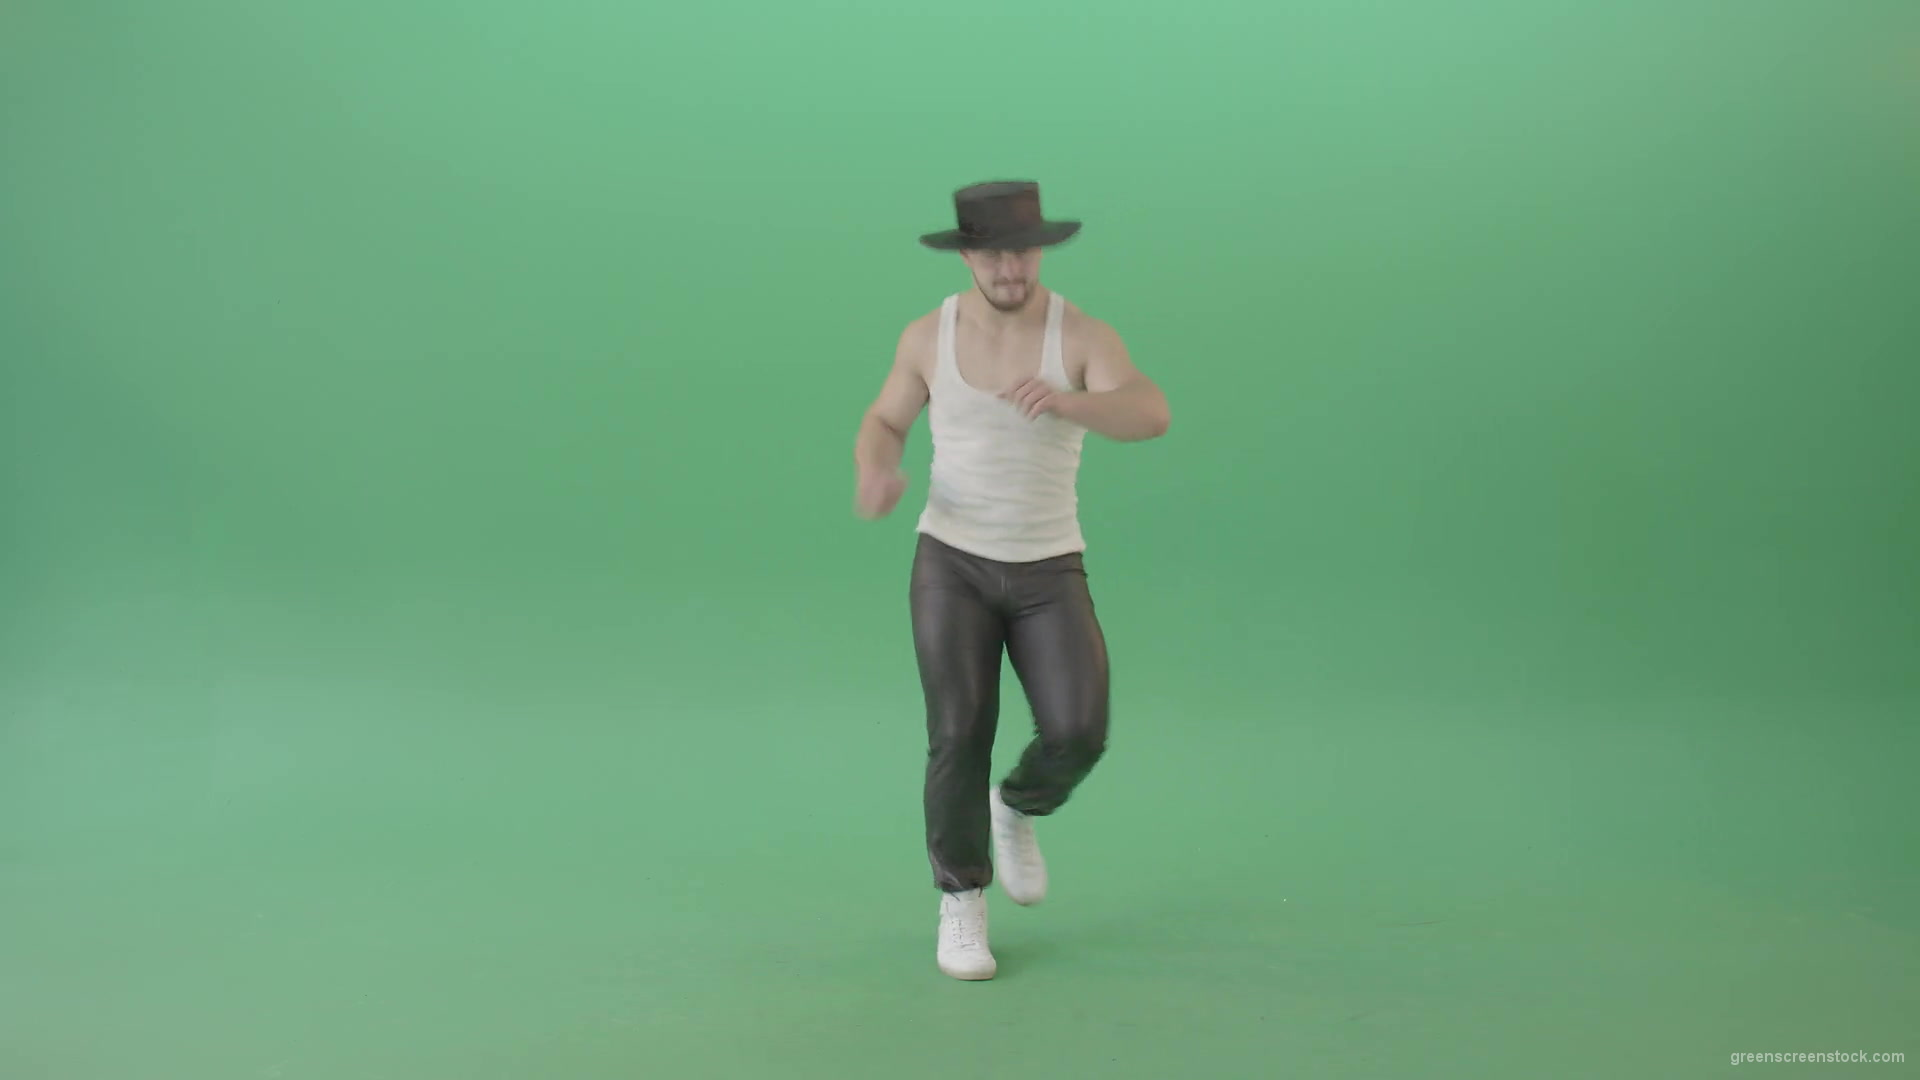 Man-dancing-popping-street-dance-and-makes-Michael-Jackson-Elements-isolated-on-Green-Screen-4K-Video-Footage-1920_002 Green Screen Stock